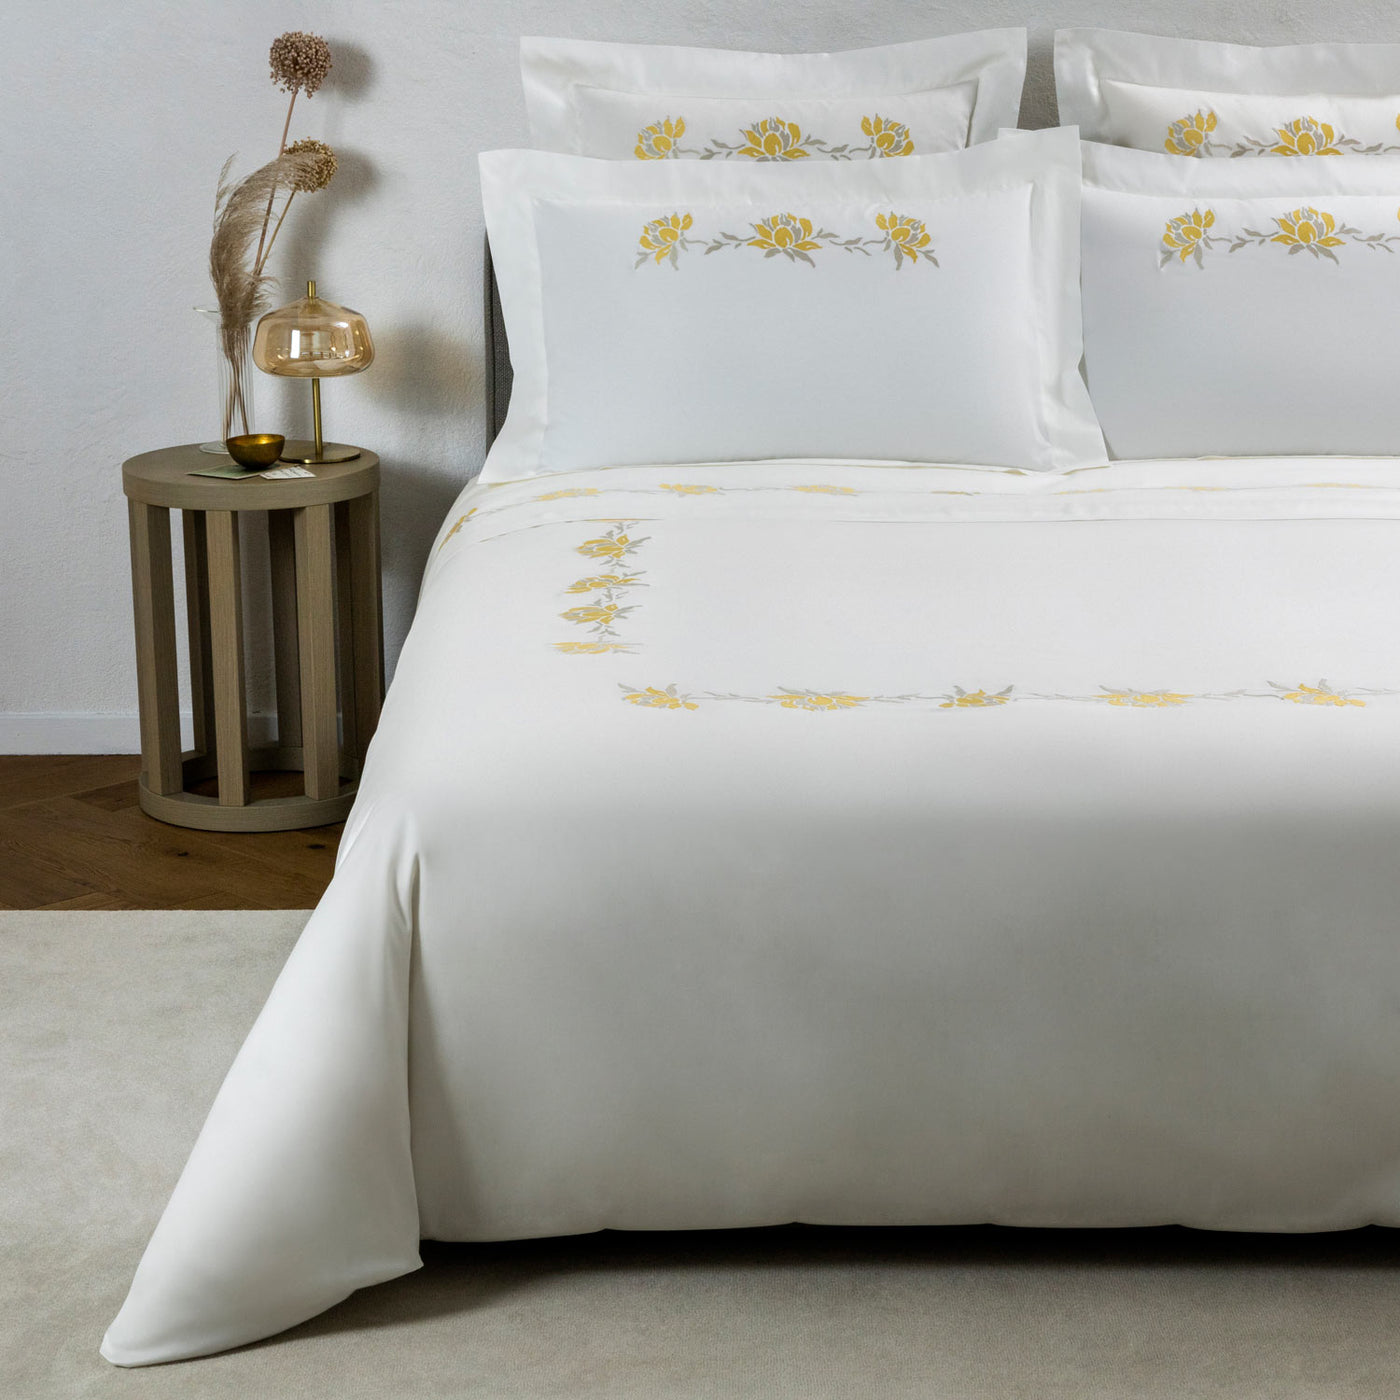 PEONIA EMBROIDERY - DUVET COVER